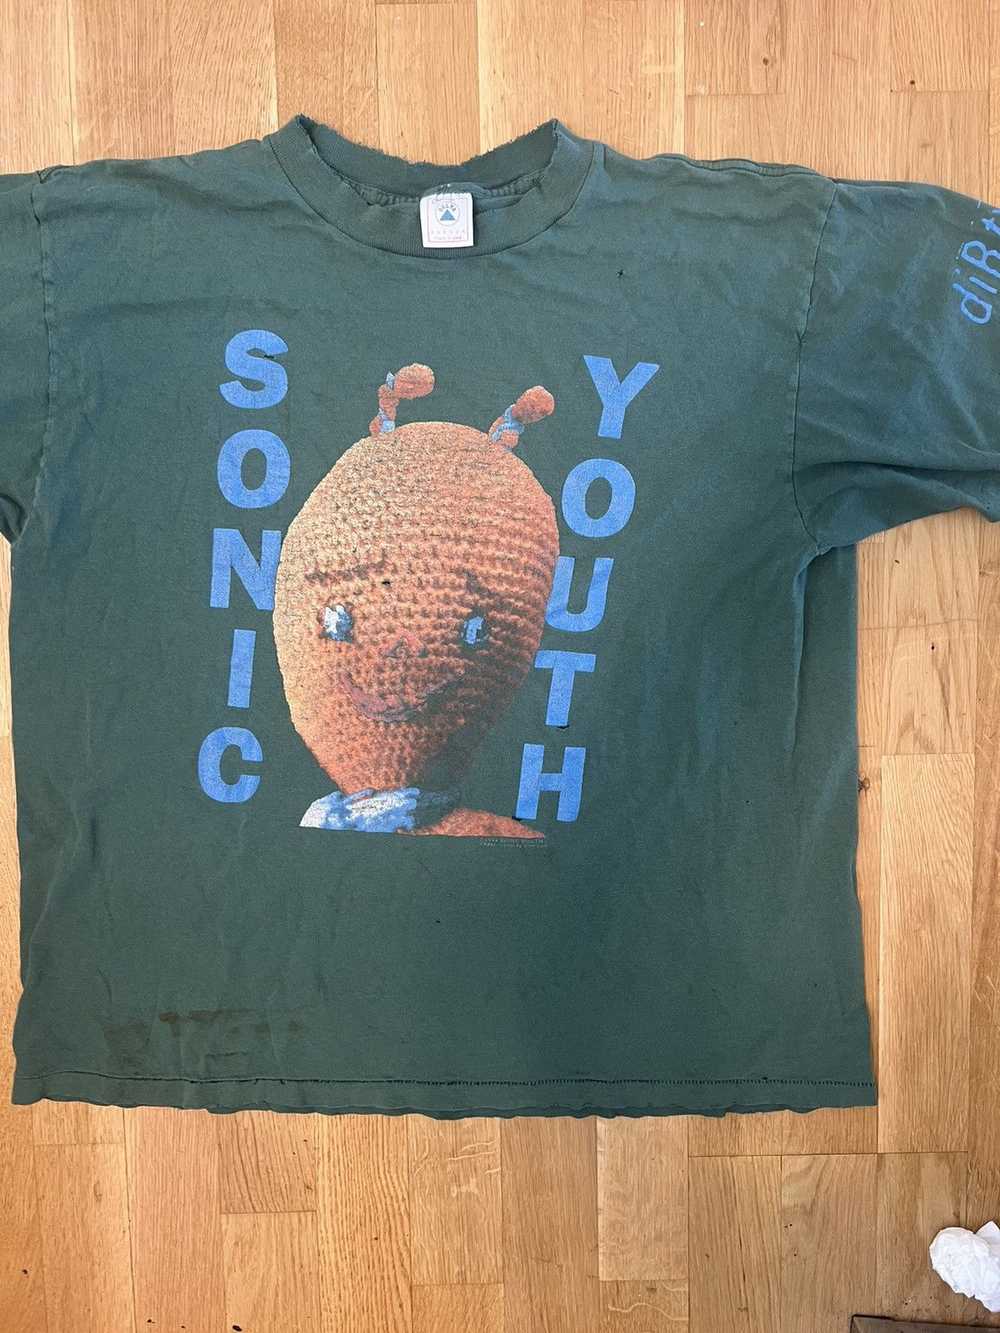 Vintage Vintage sonic youth dirty t shirt - image 1